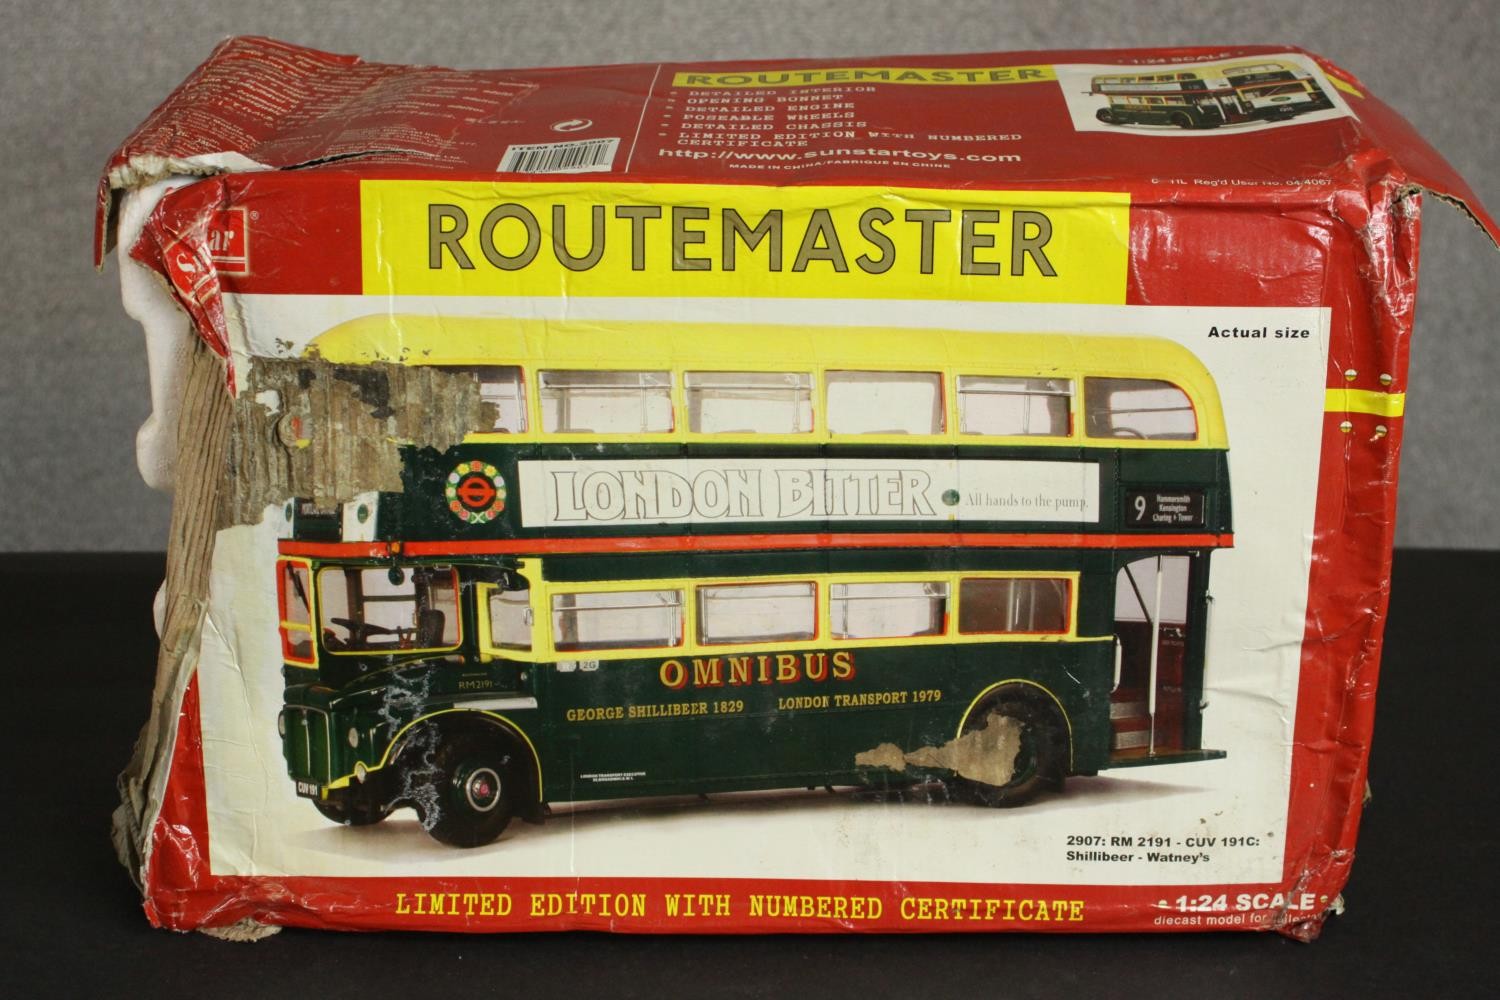 A boxed AEC Routemaster Bus, Oxford Die-cast NRM002, London Transport (1979 Shillibeer Omnibus - Image 19 of 21